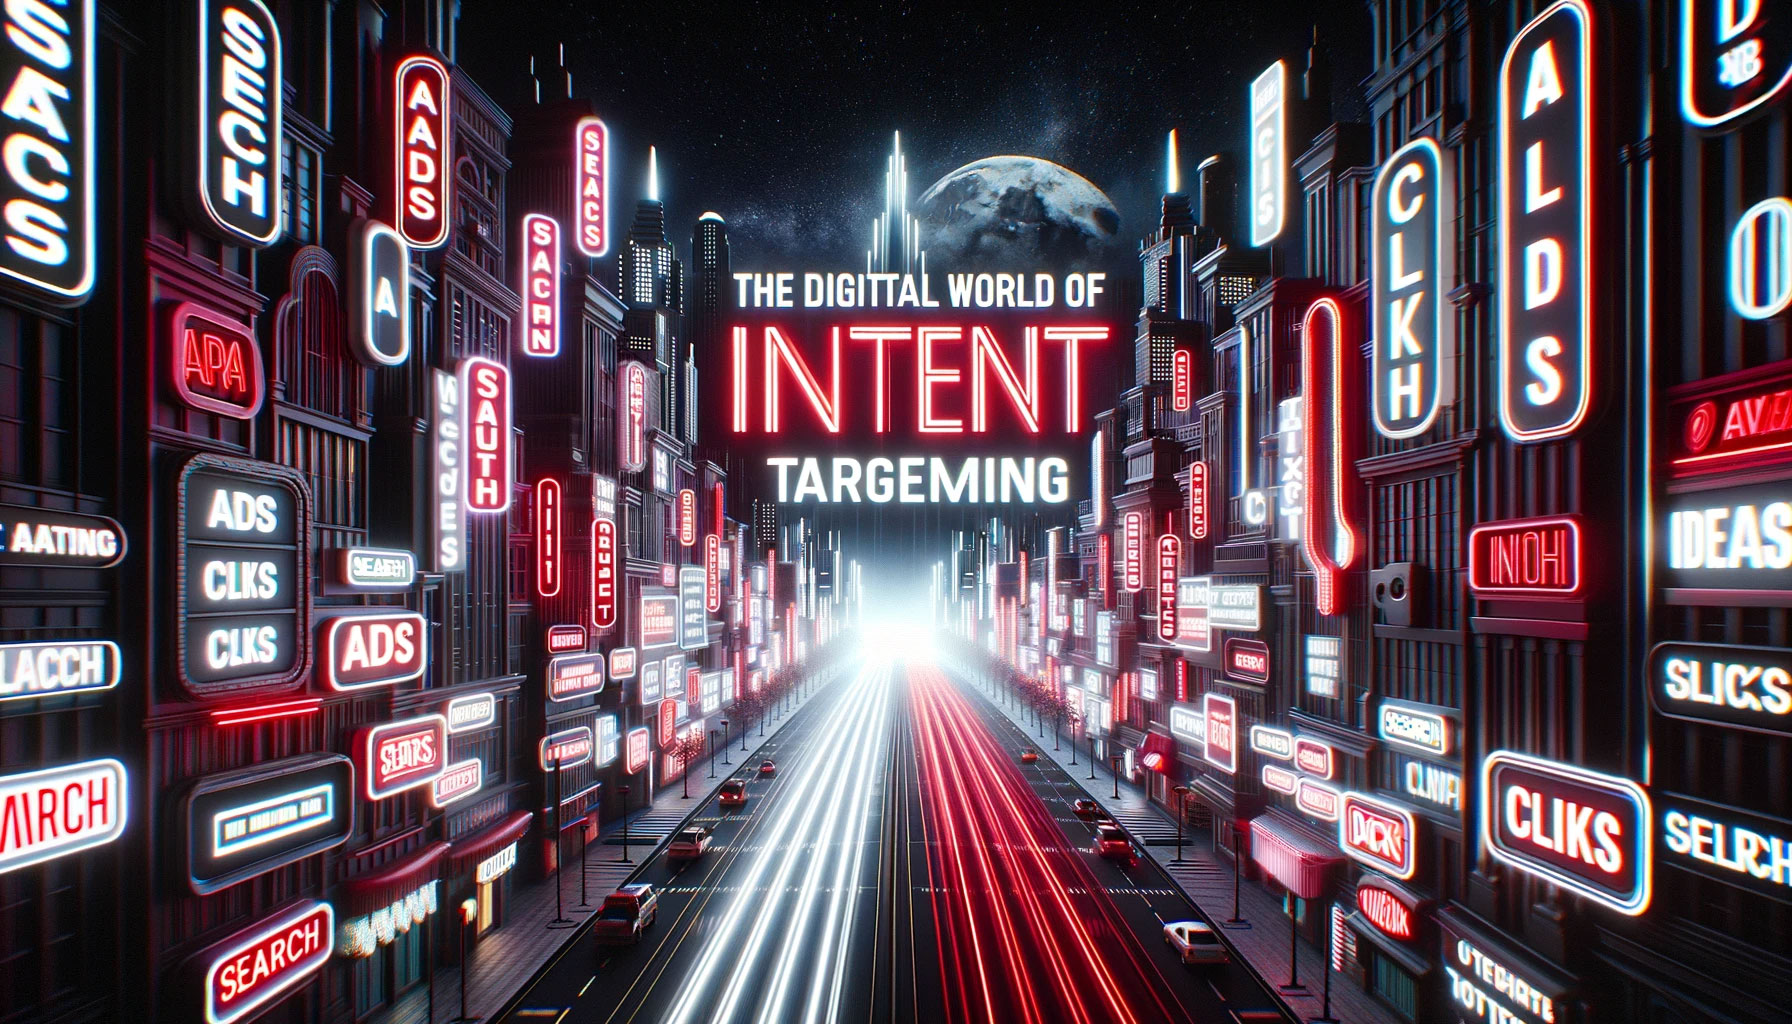 Image of a digital cityscape at night with neon signs displaying words like 'Search', 'Ads', 'Clicks', and 'Intent'. The title 'The Digital World of Intent Targeting' stands out in bold red letters against a black sky. The overall theme is cyberpunk-inspired.